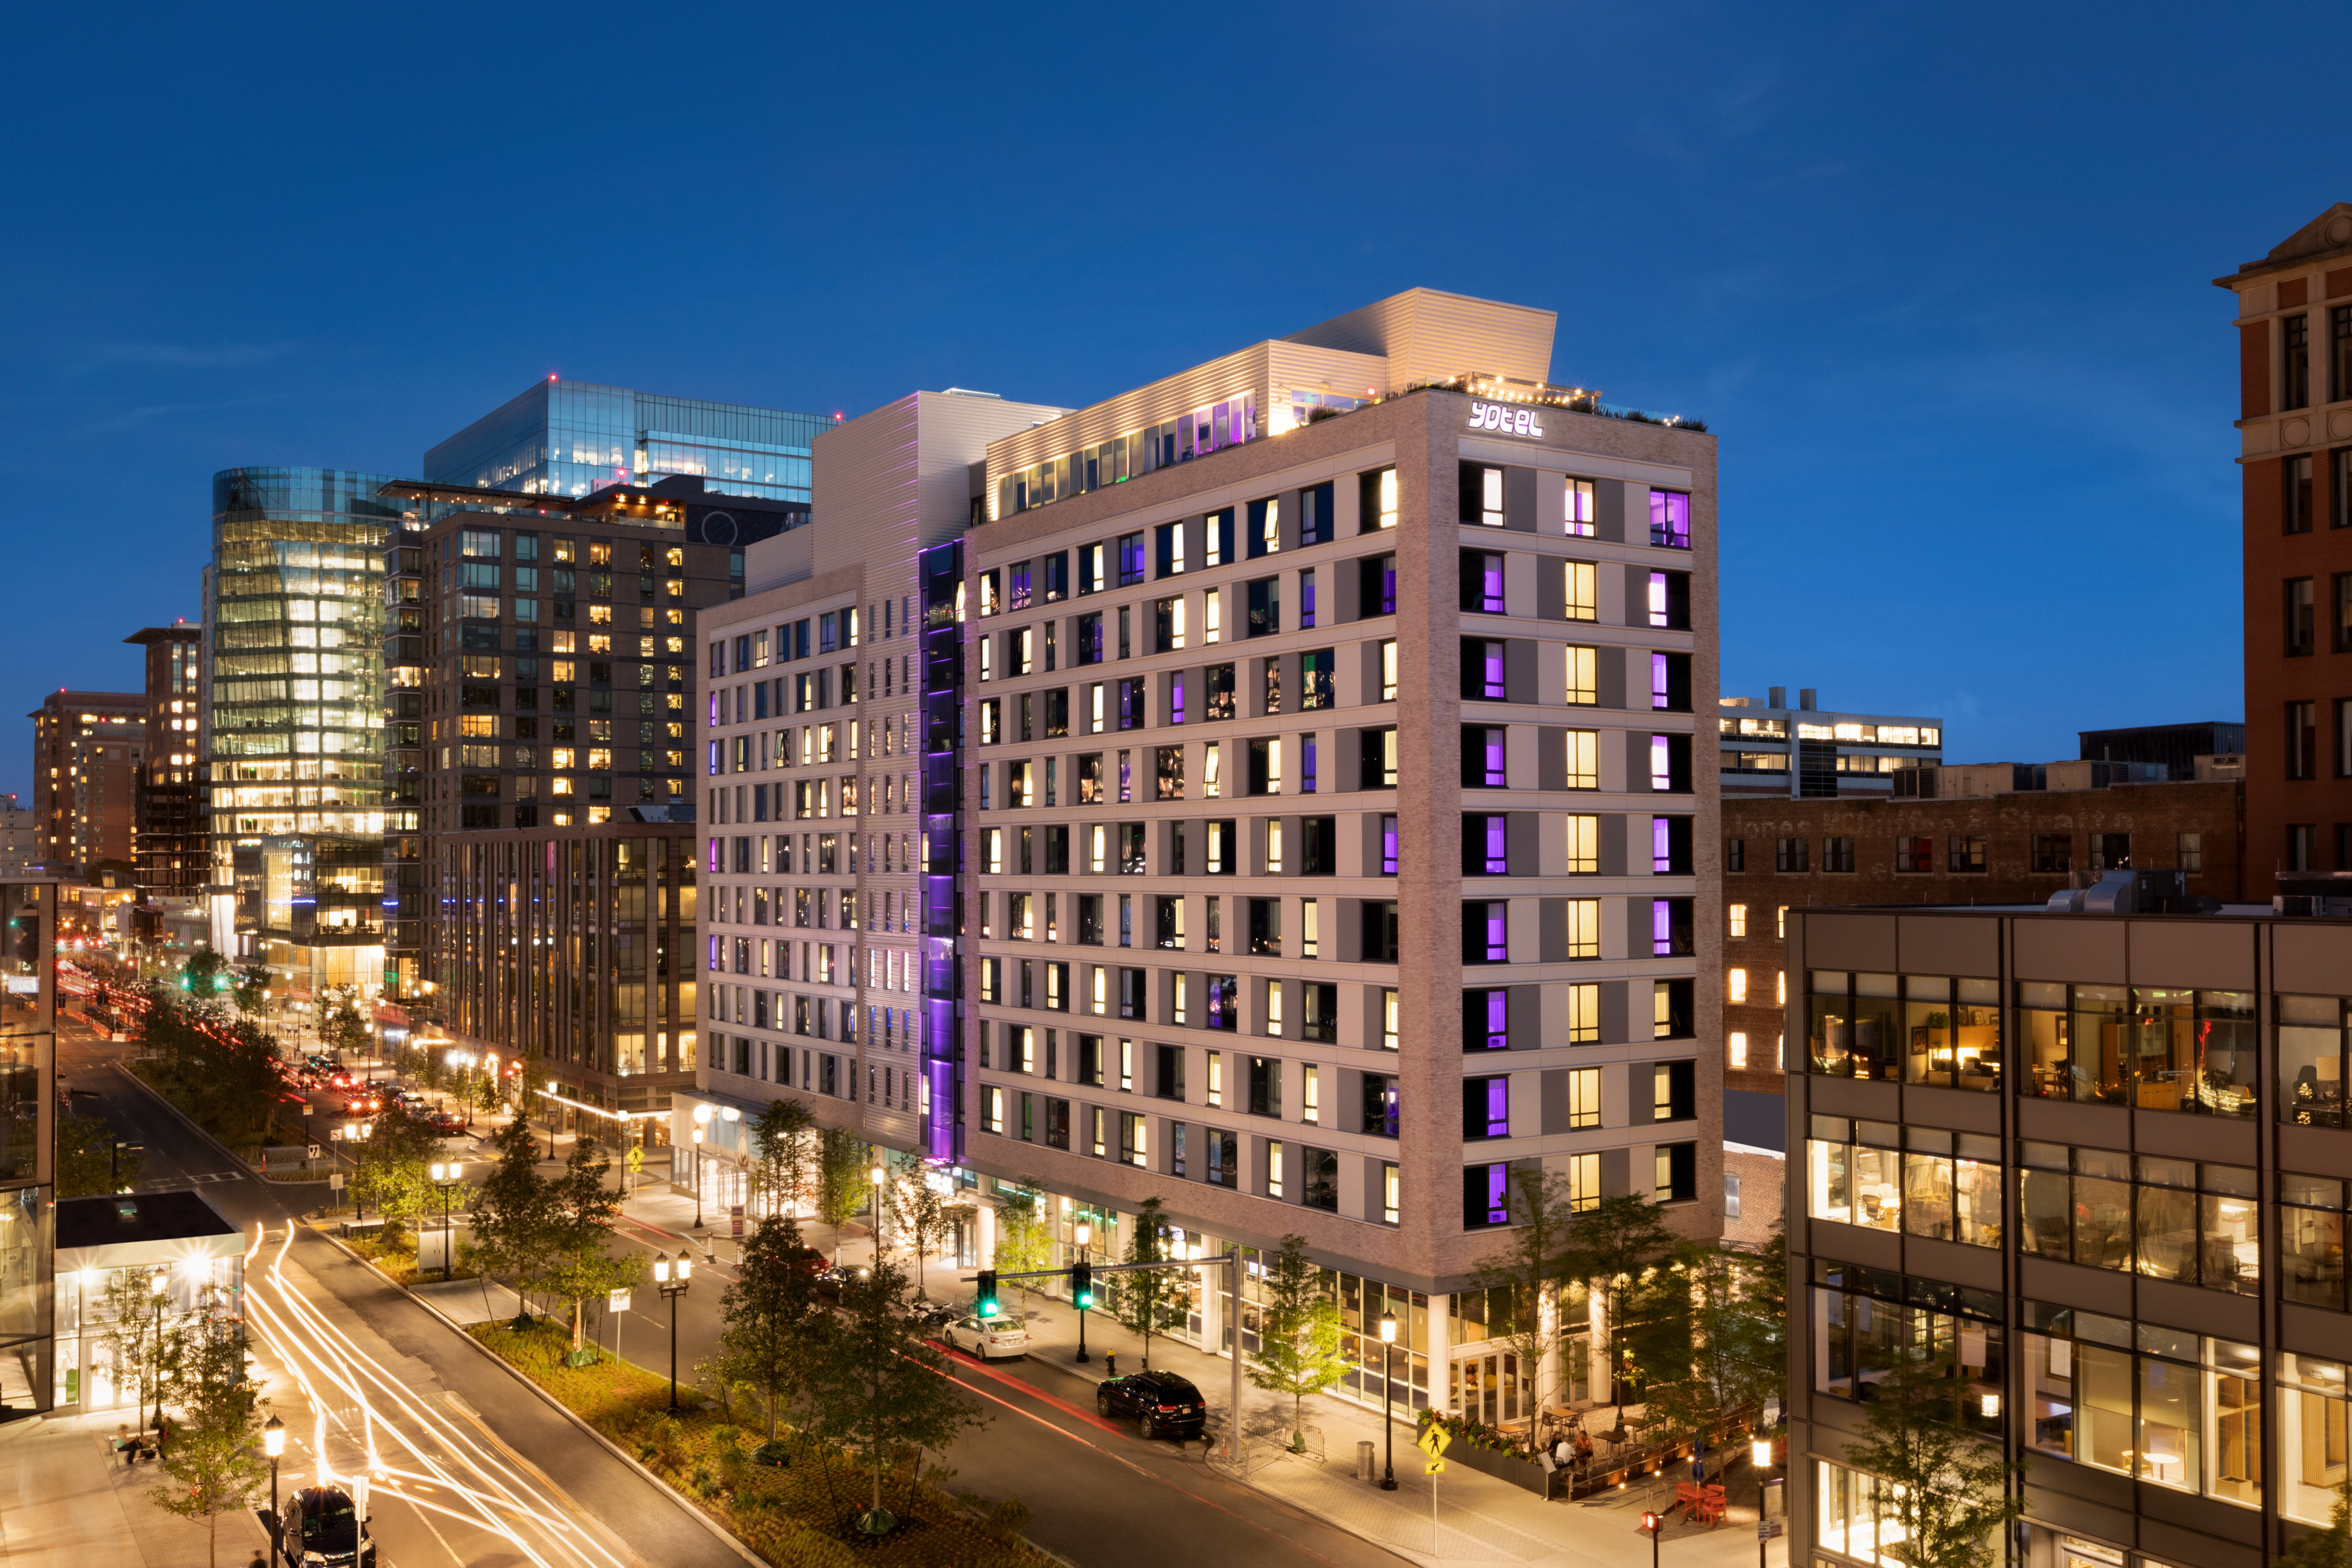 Yotel Boston moves away from manual reporting